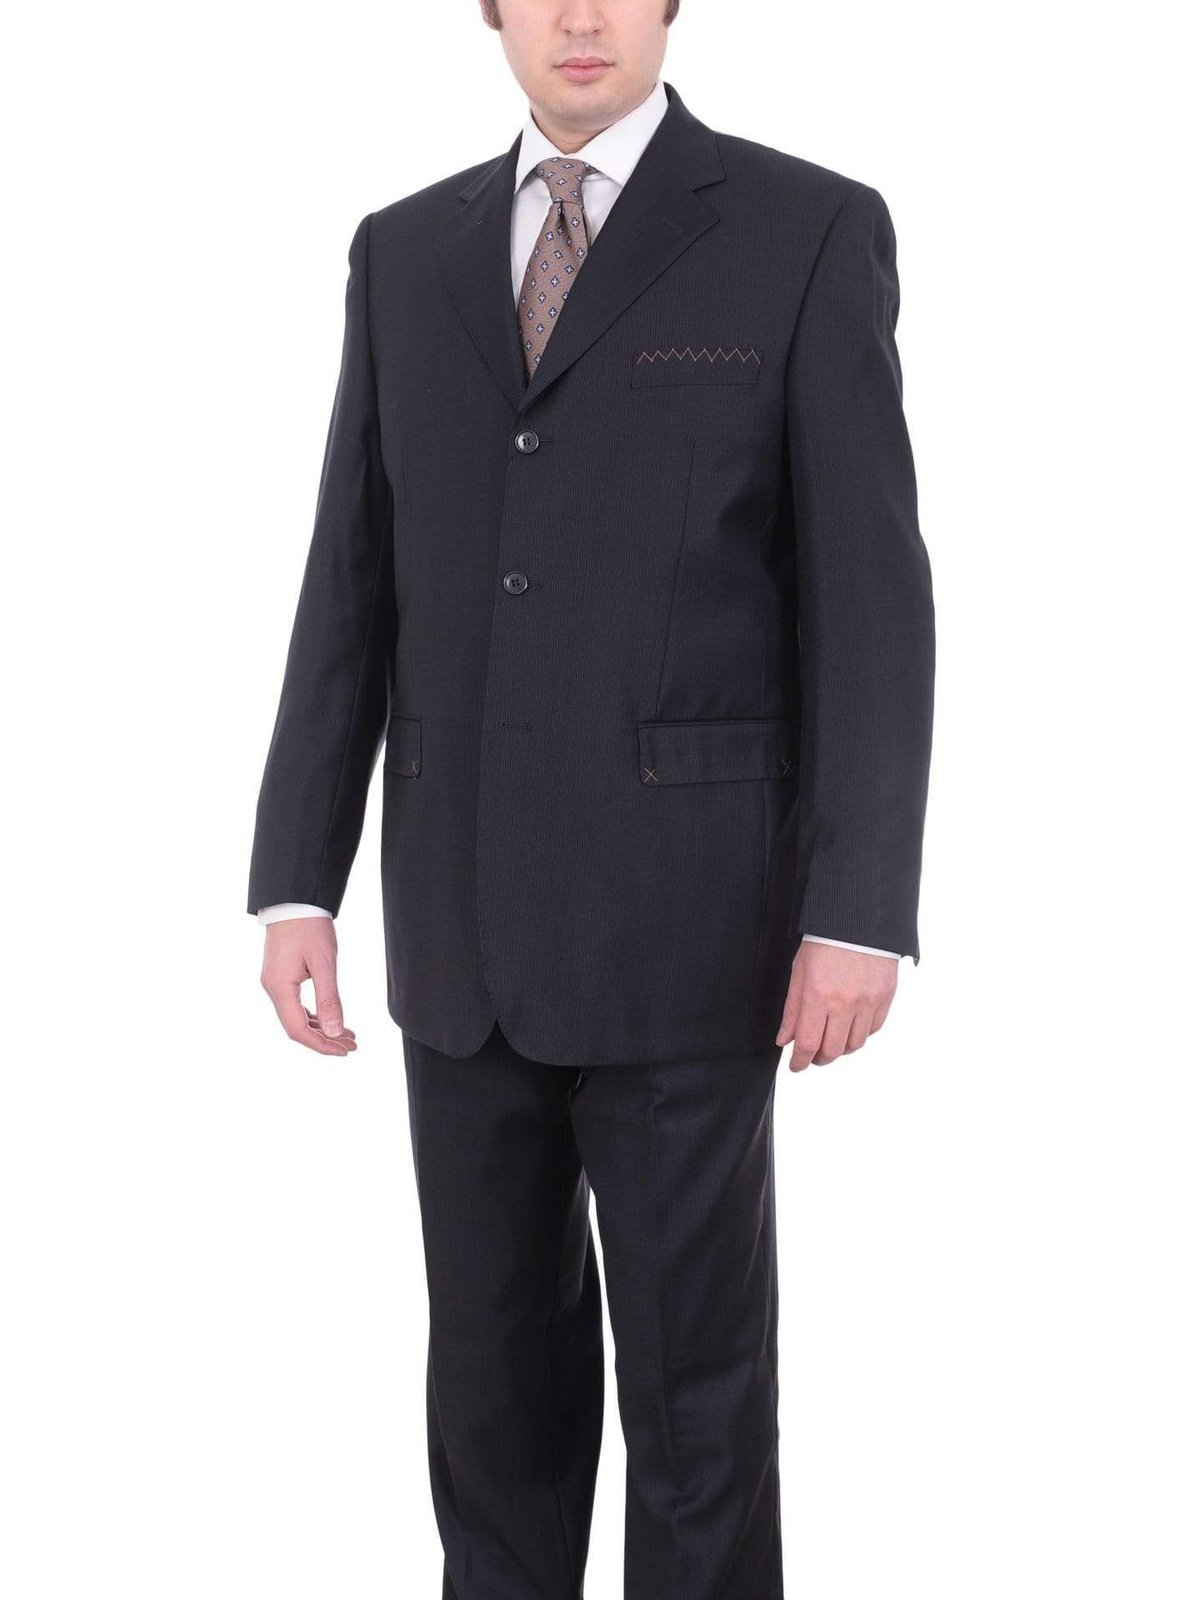 Carlo Palazzi Sale Suits Mens Italy Classic Fit Navy Blue 3 Button Pleated 100% Wool Suit